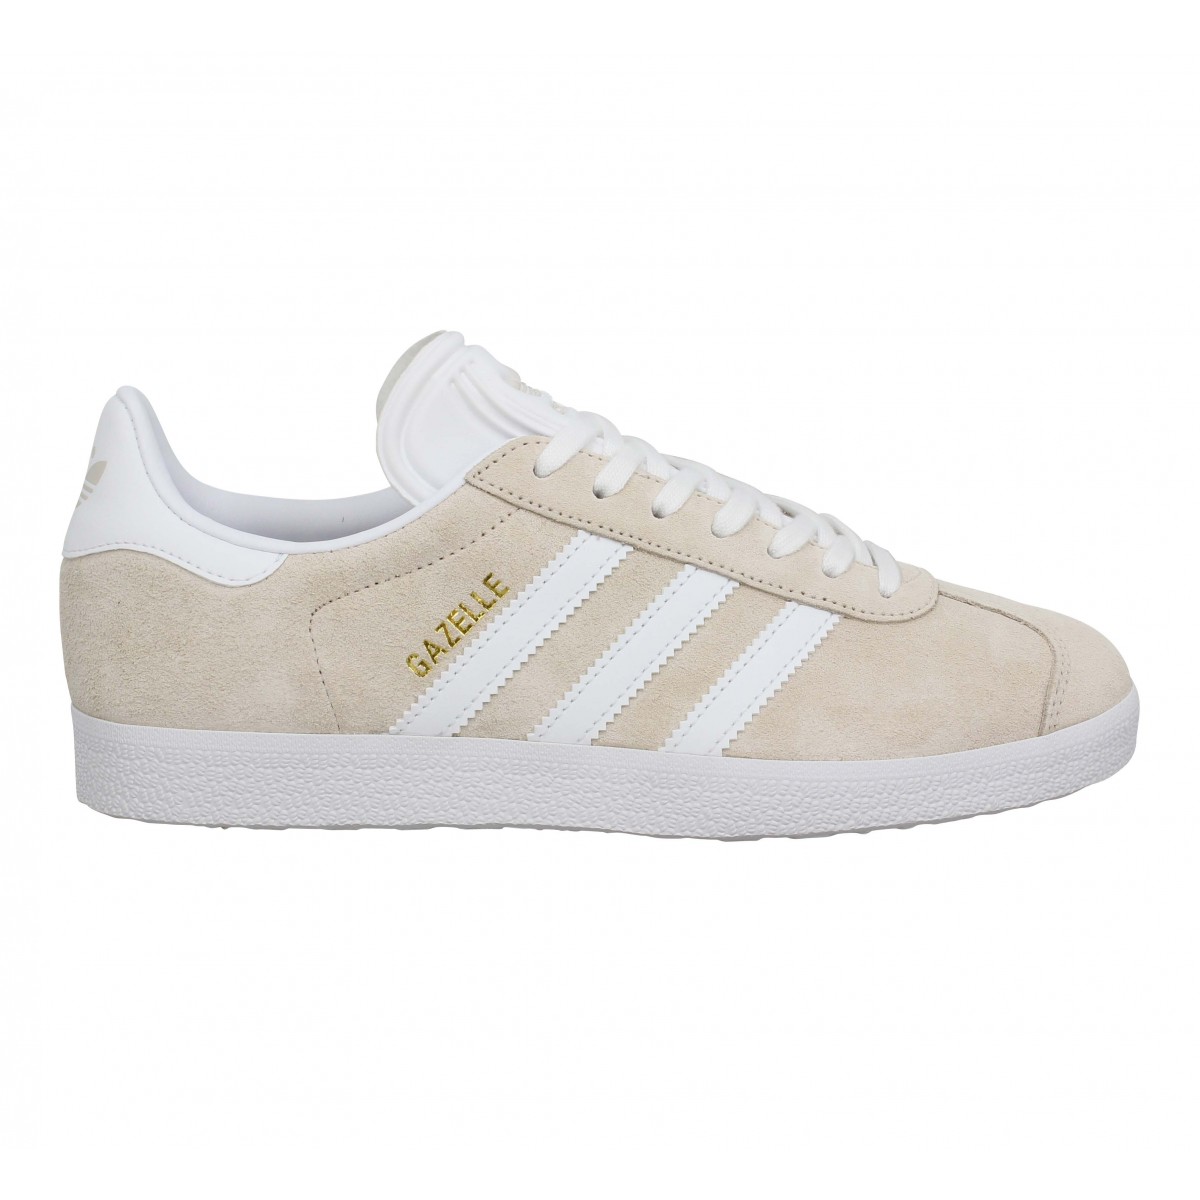 Adidas gazelle velours lin femme homme | Fanny chaussures